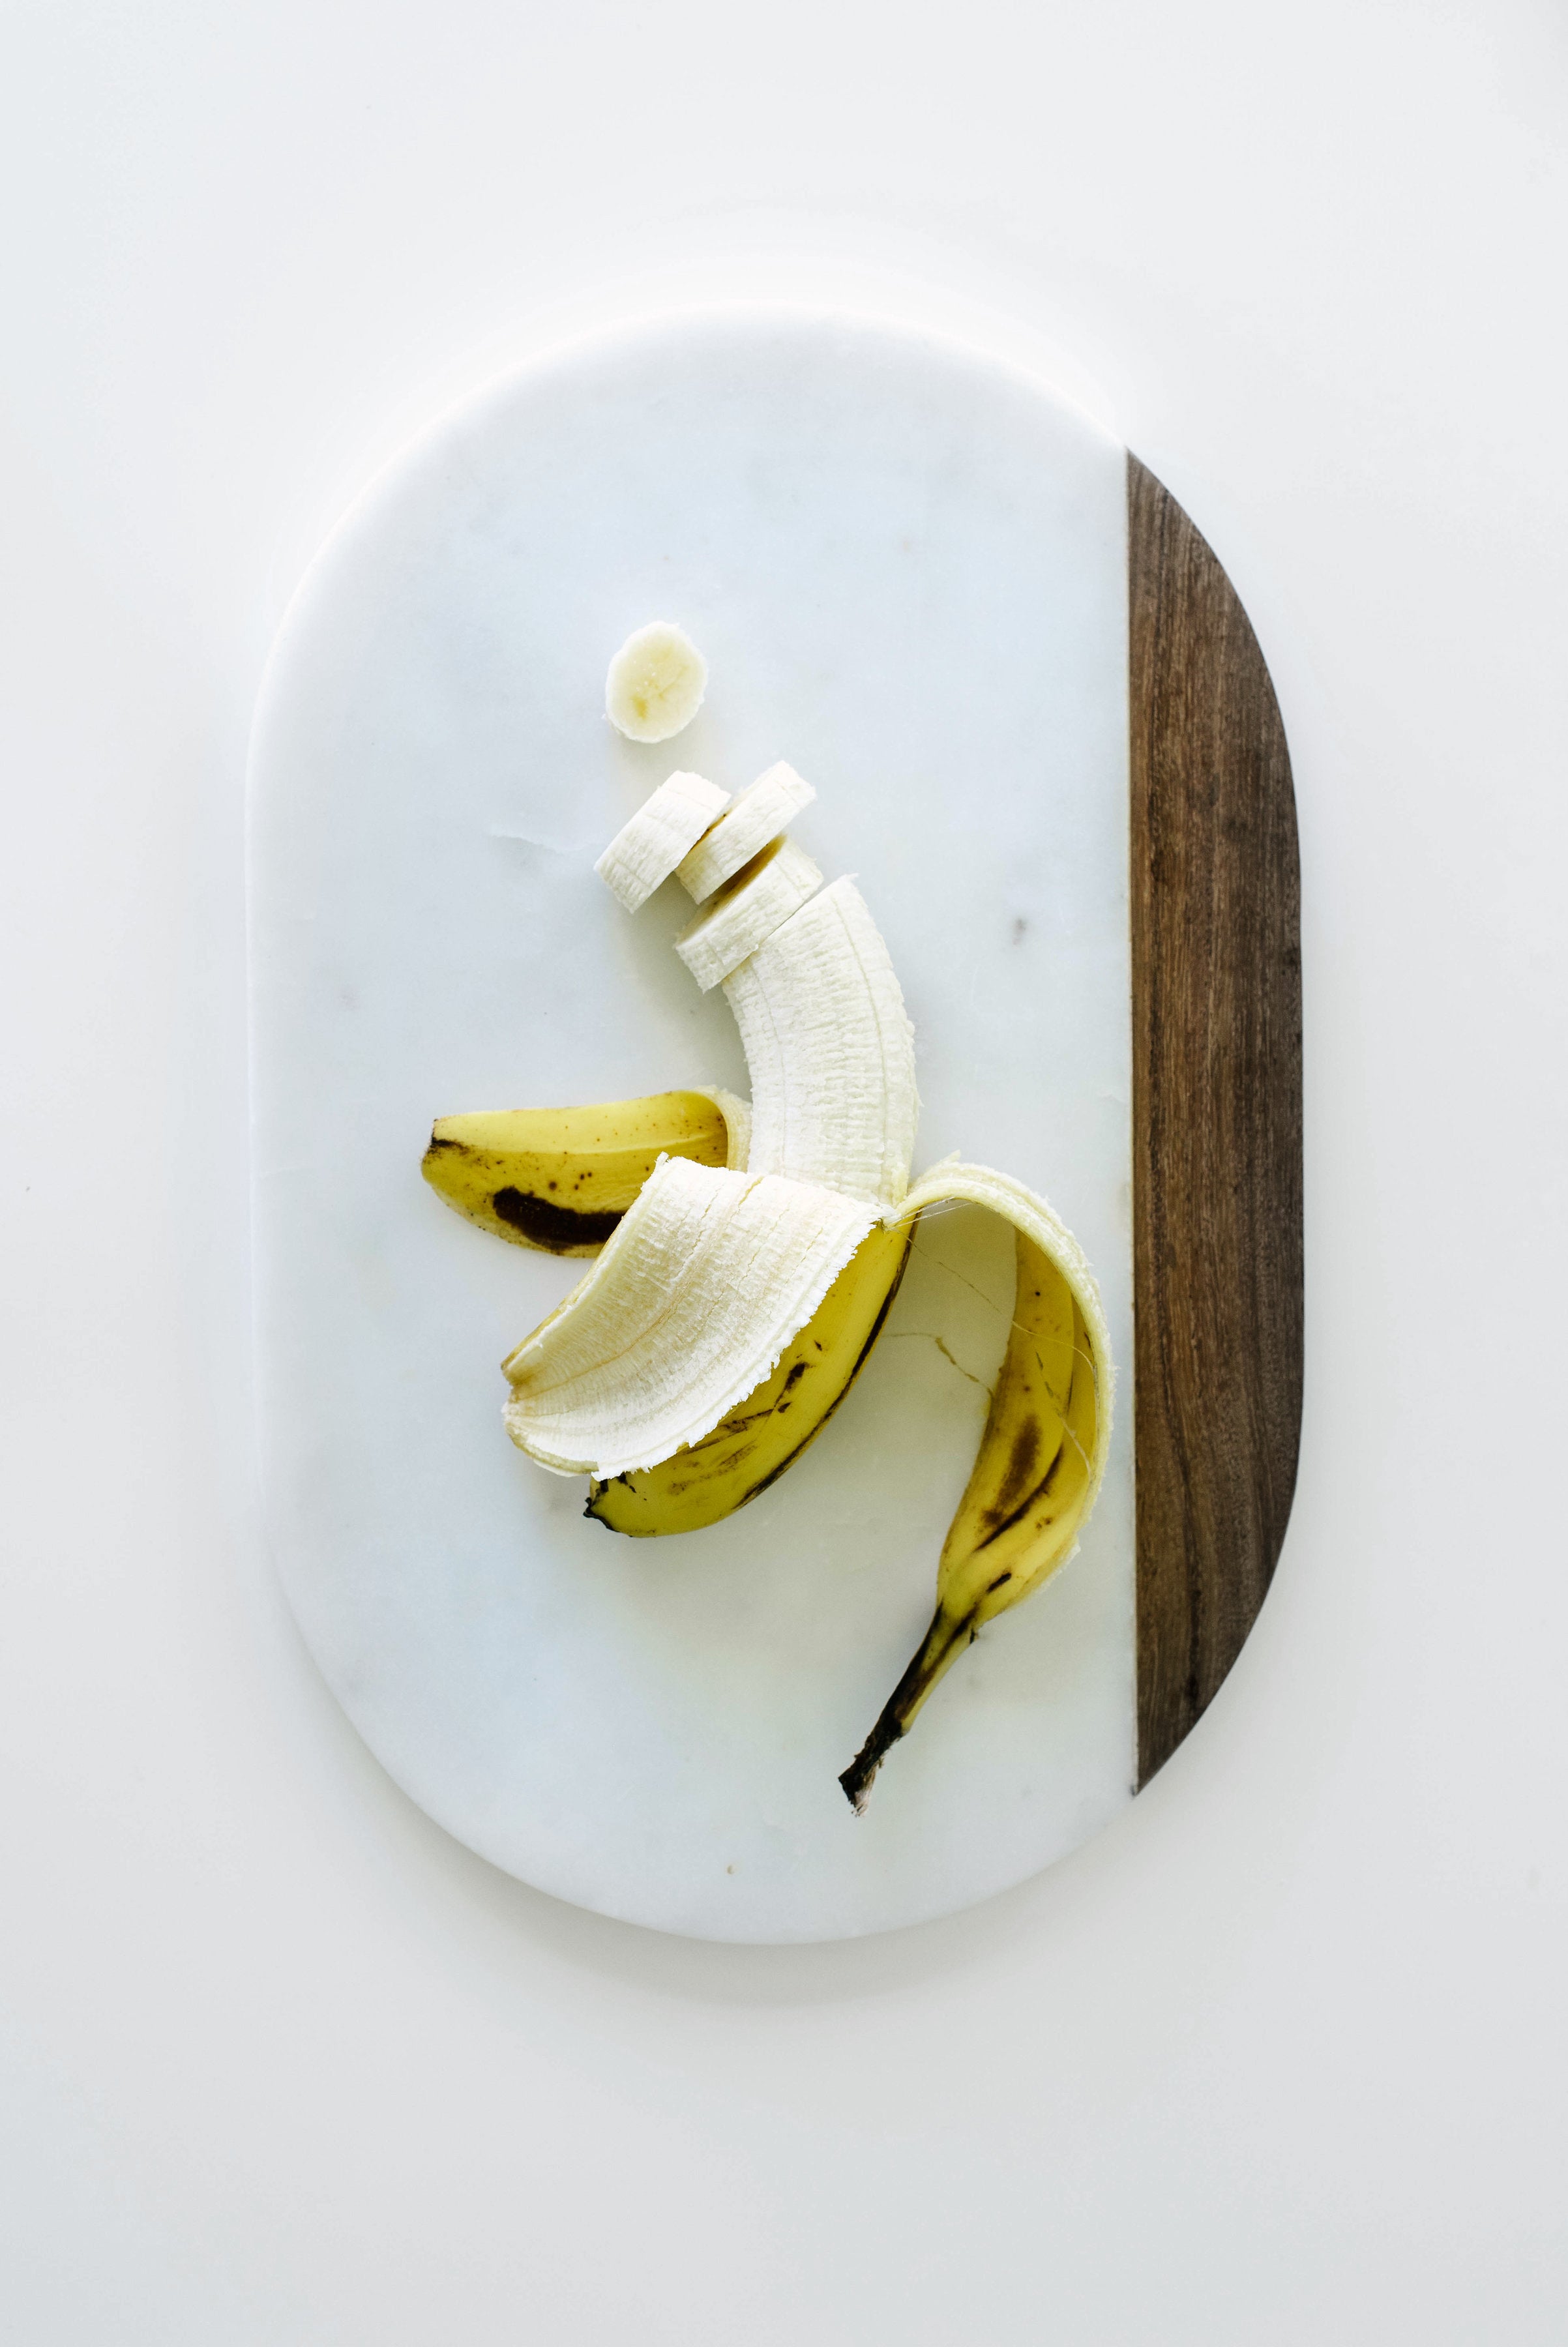 Image of a partly sliced banana used for Miss Jones Baking Co Chocolate Cake Batter Peanut Butter Nice Cream recipe